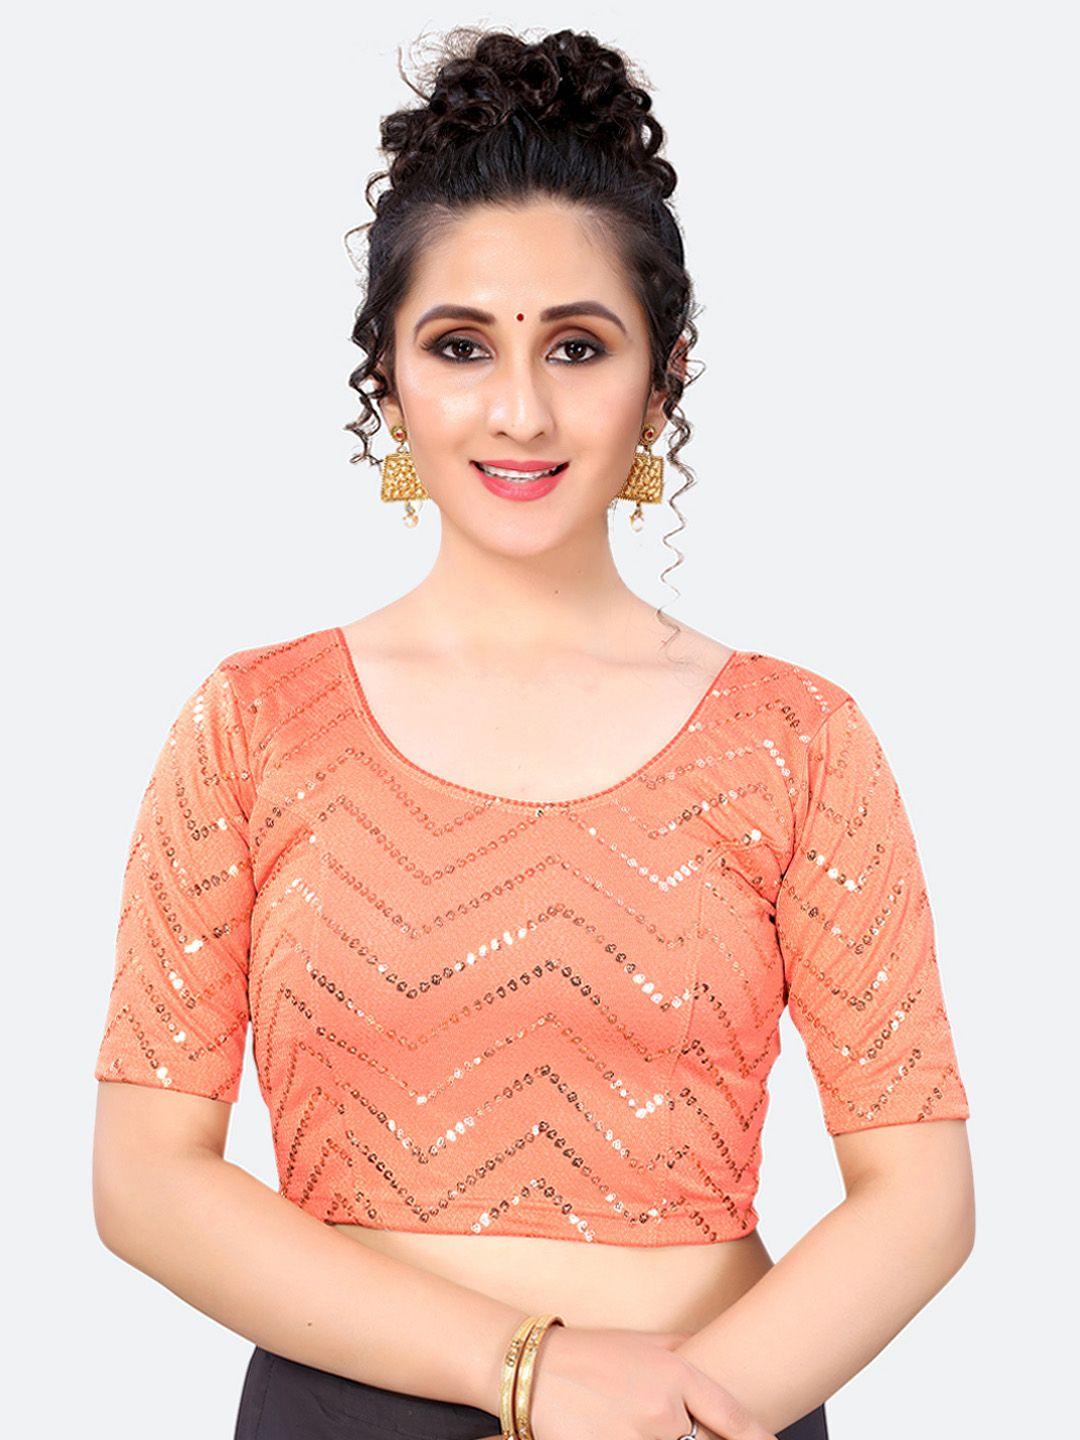 siril women peach-coloured & gold-coloured embellished saree blouse